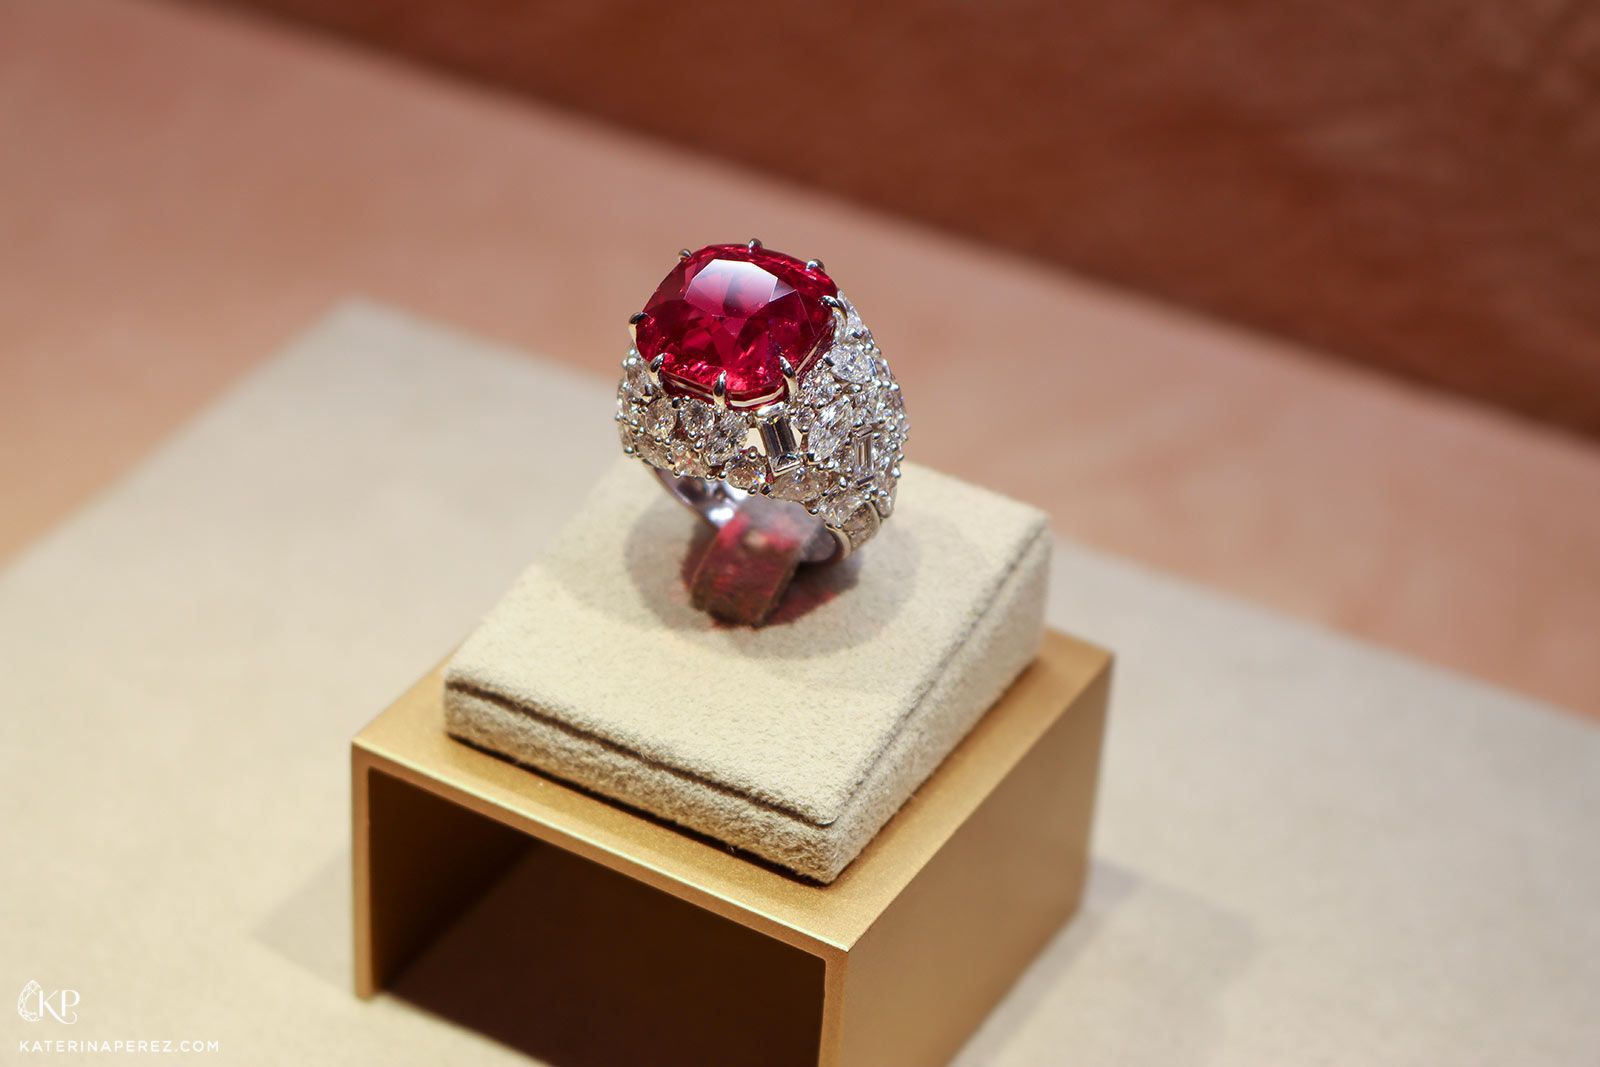 Maison Avani ring with a 21,02 cts red spinel and diamonds